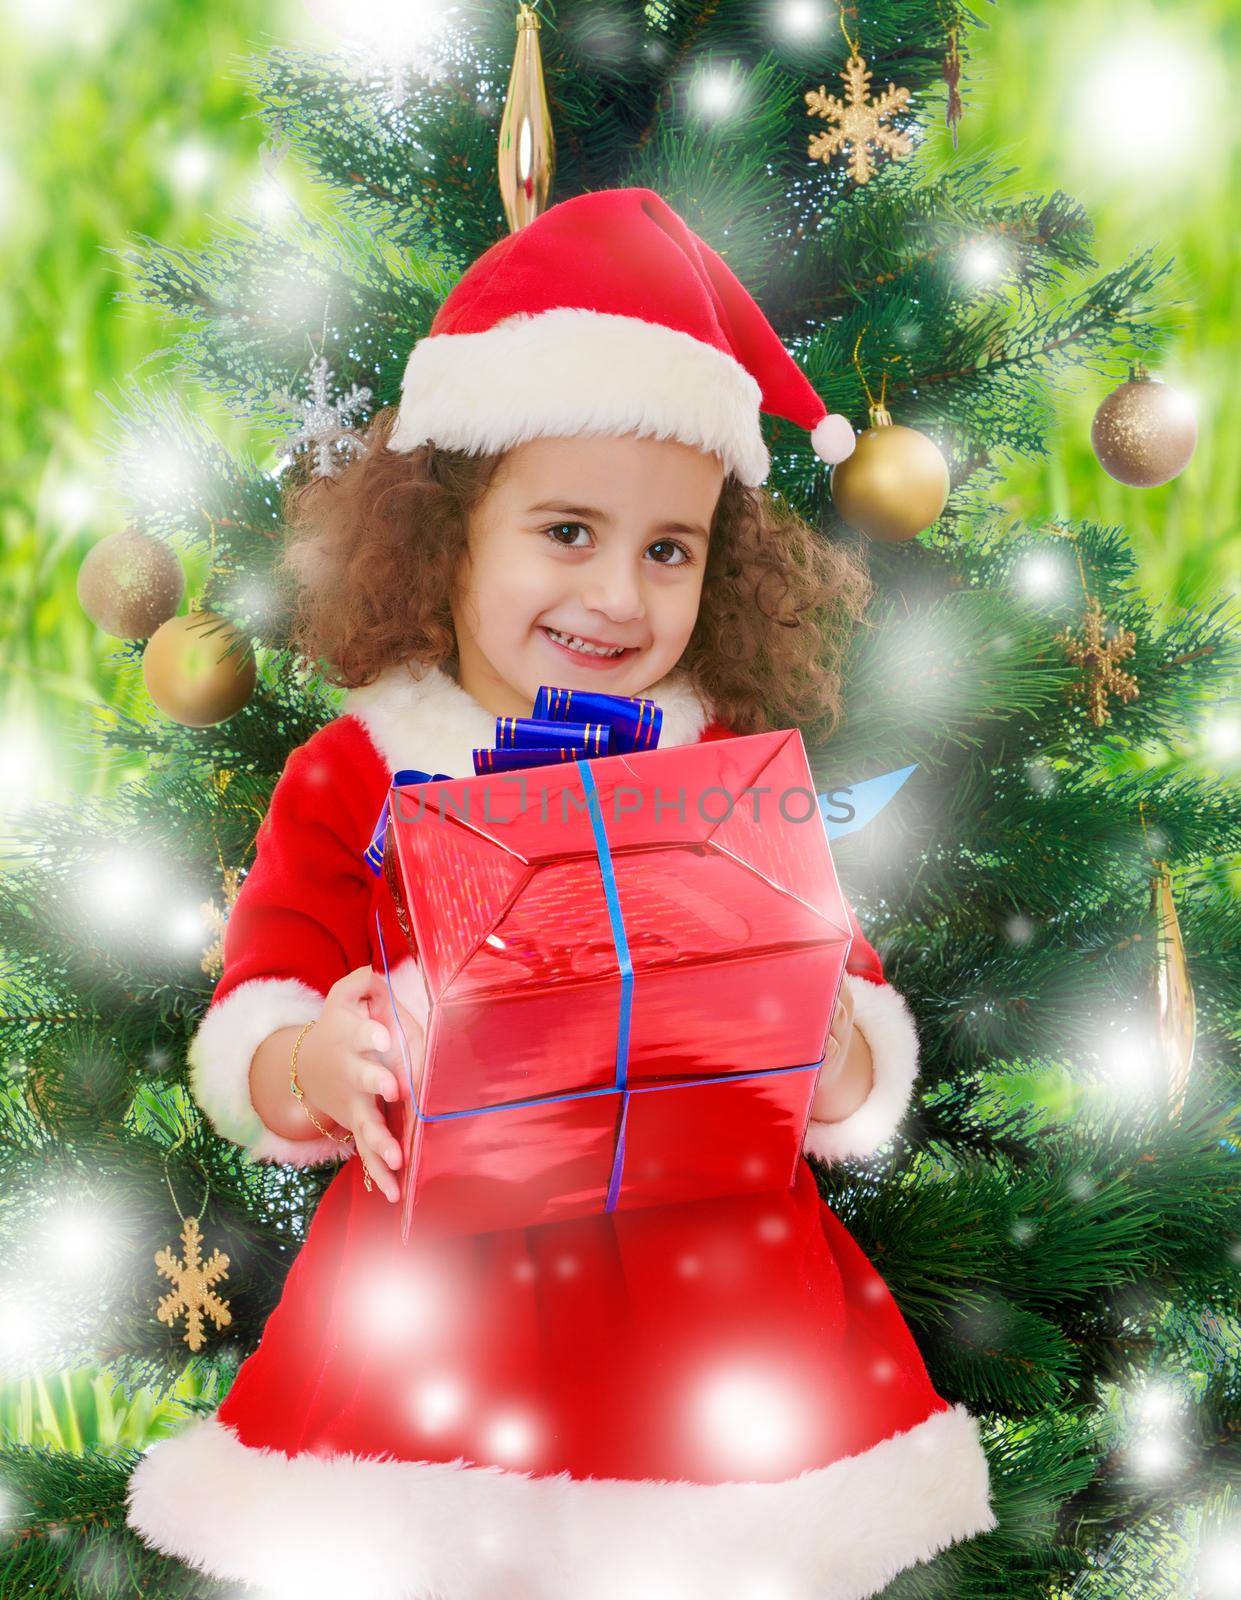 Little girl near the Christmas tree with a gift in its hands by kolesnikov_studio